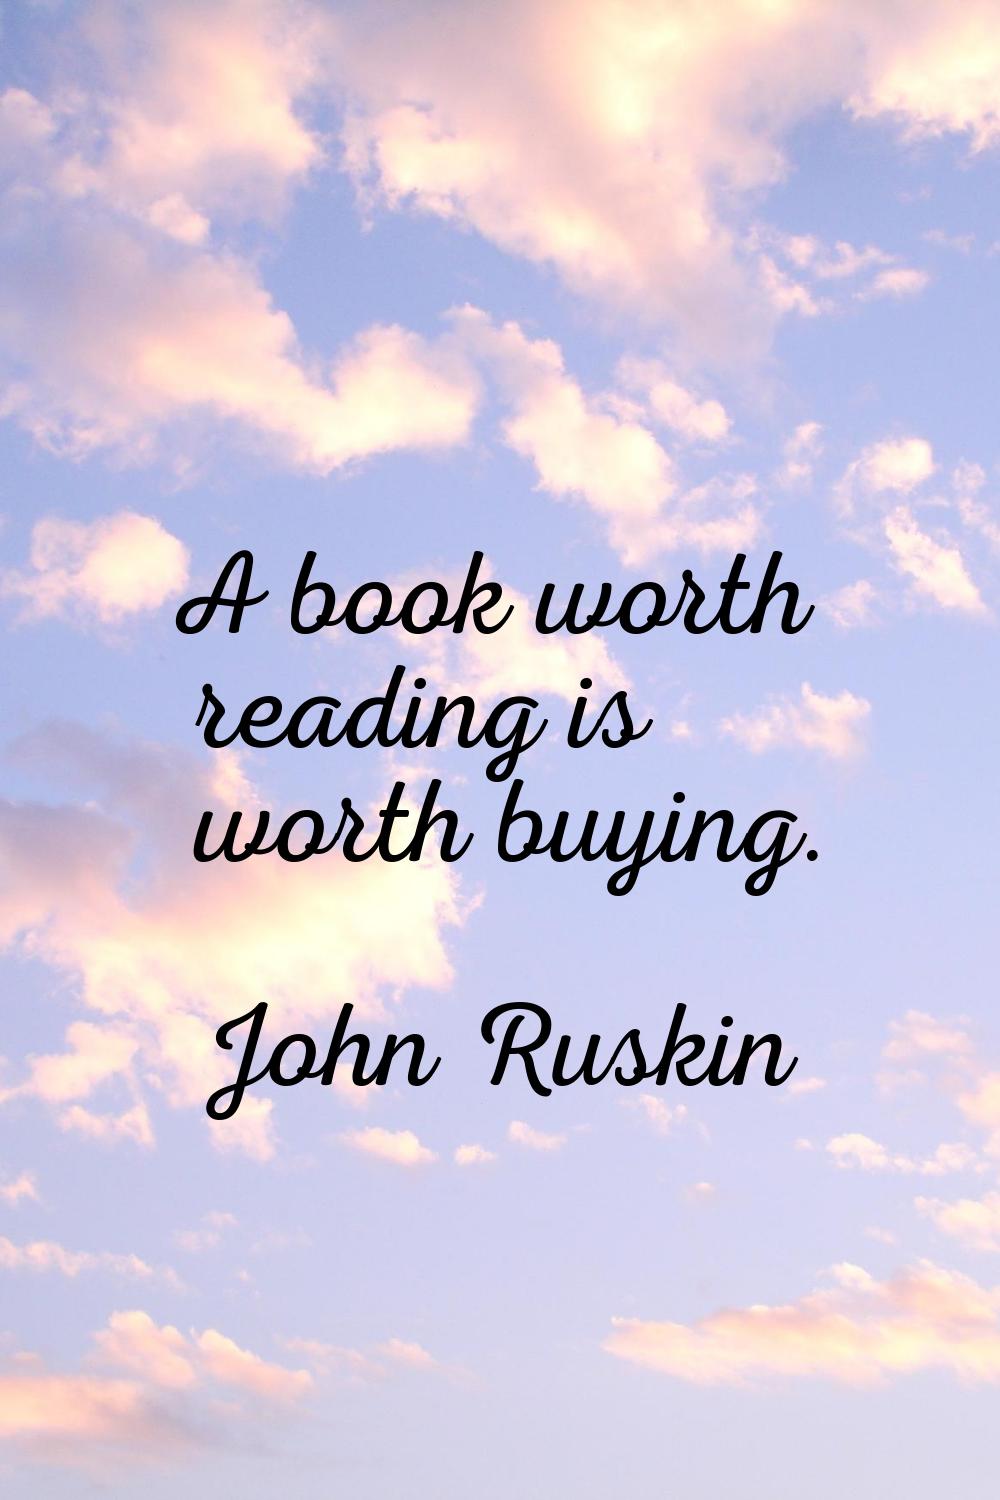 A book worth reading is worth buying.